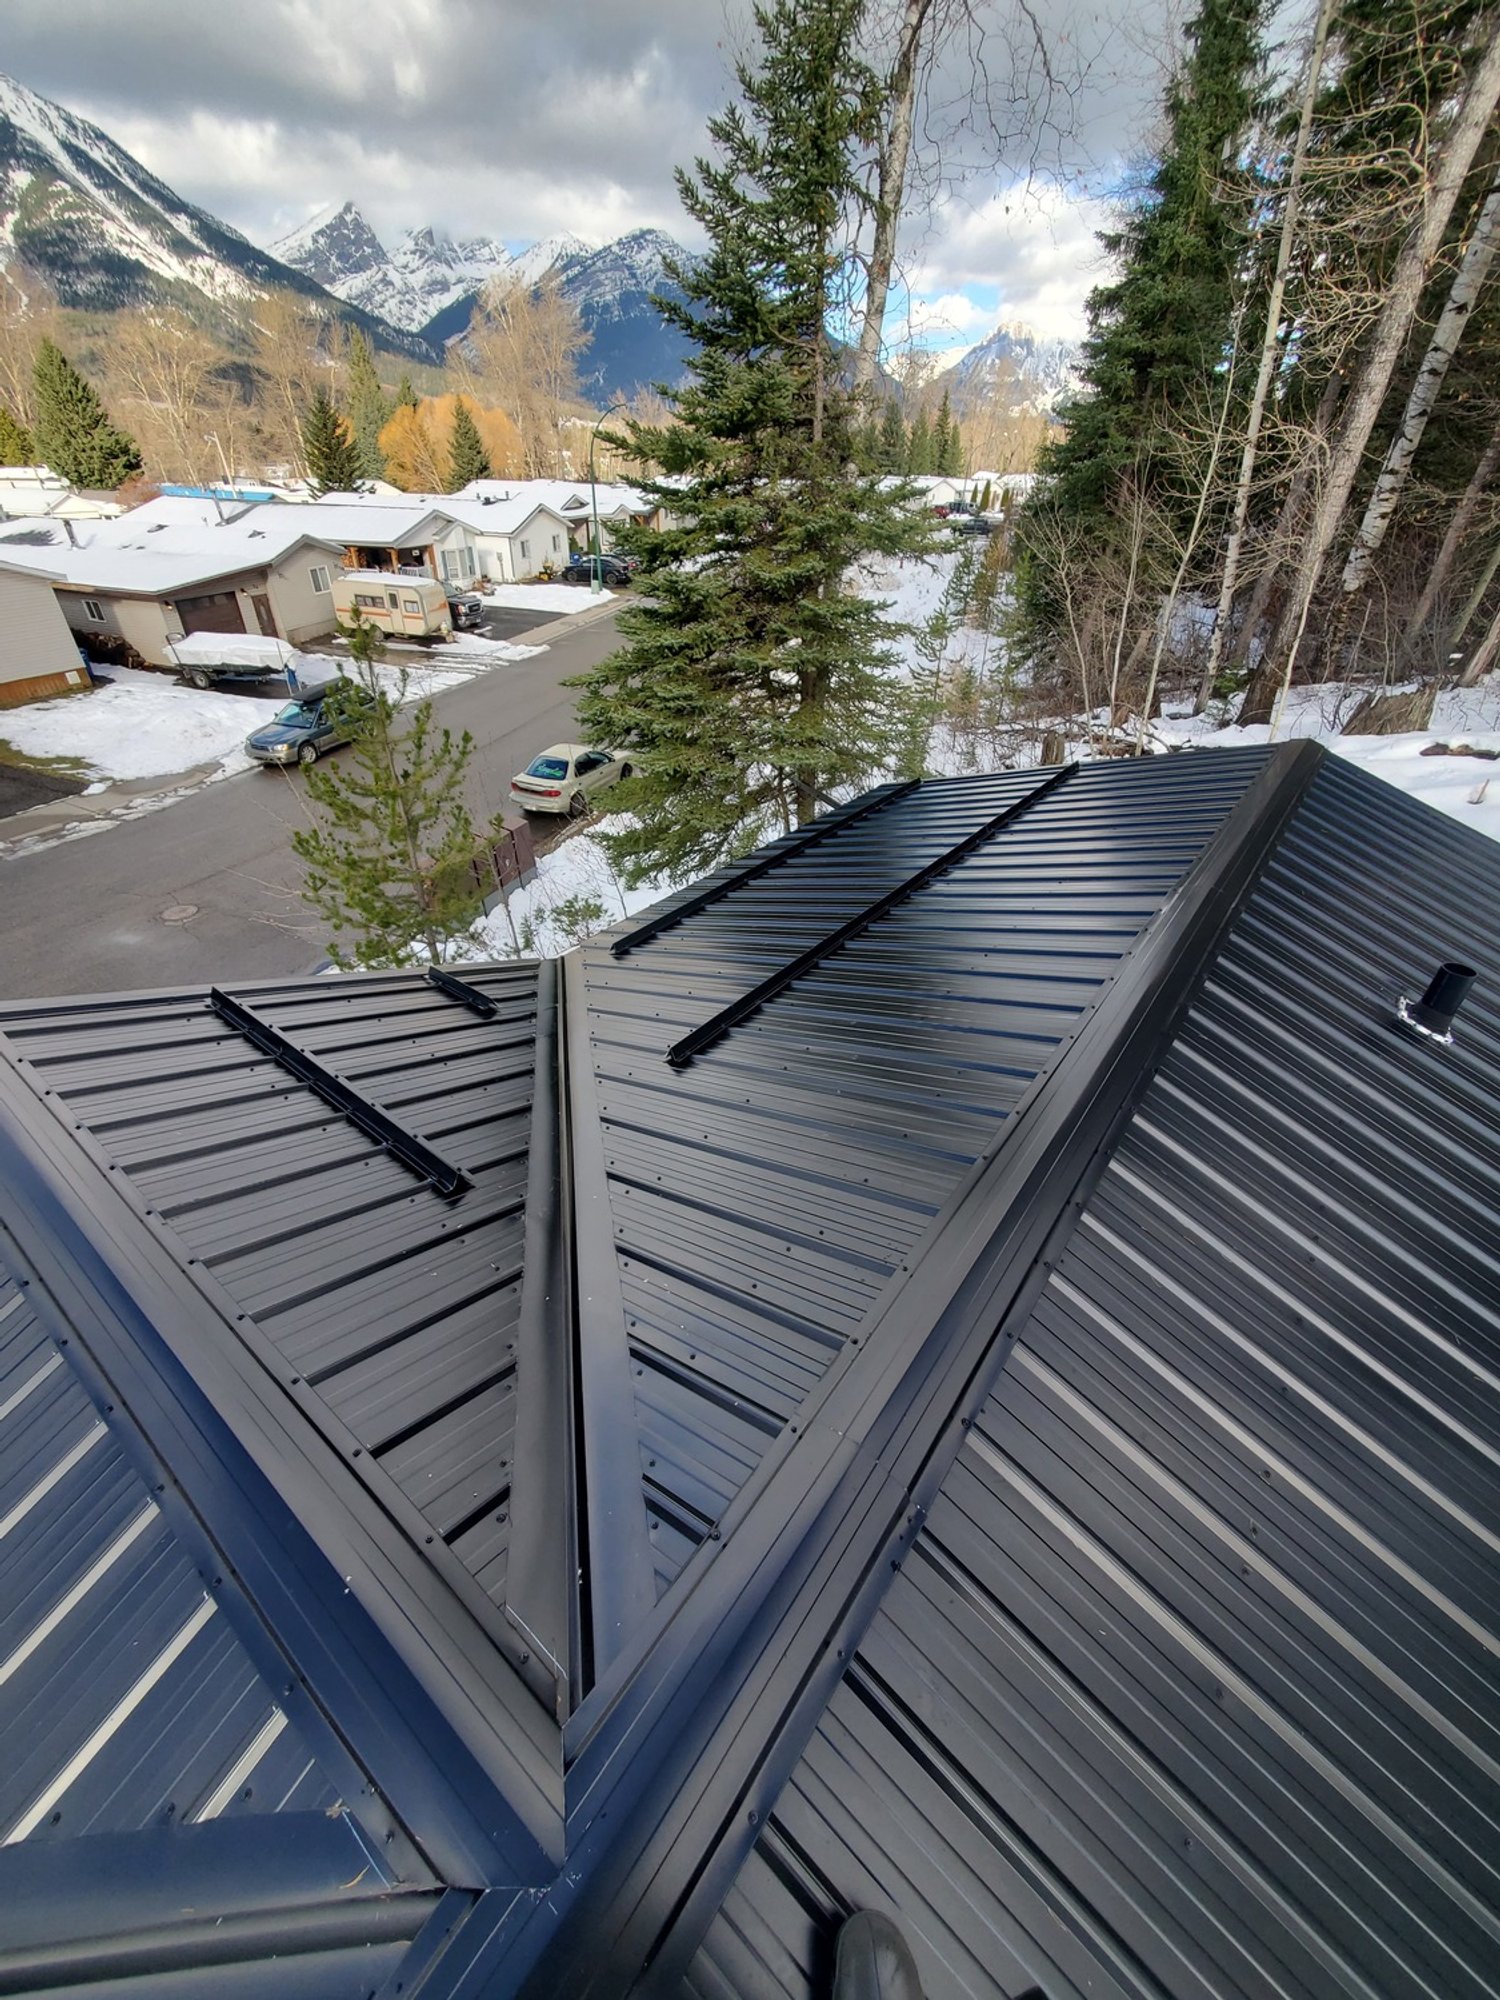 Birdhouse Roofing - Forma Steel I9 Metal Roof with Snow Bars